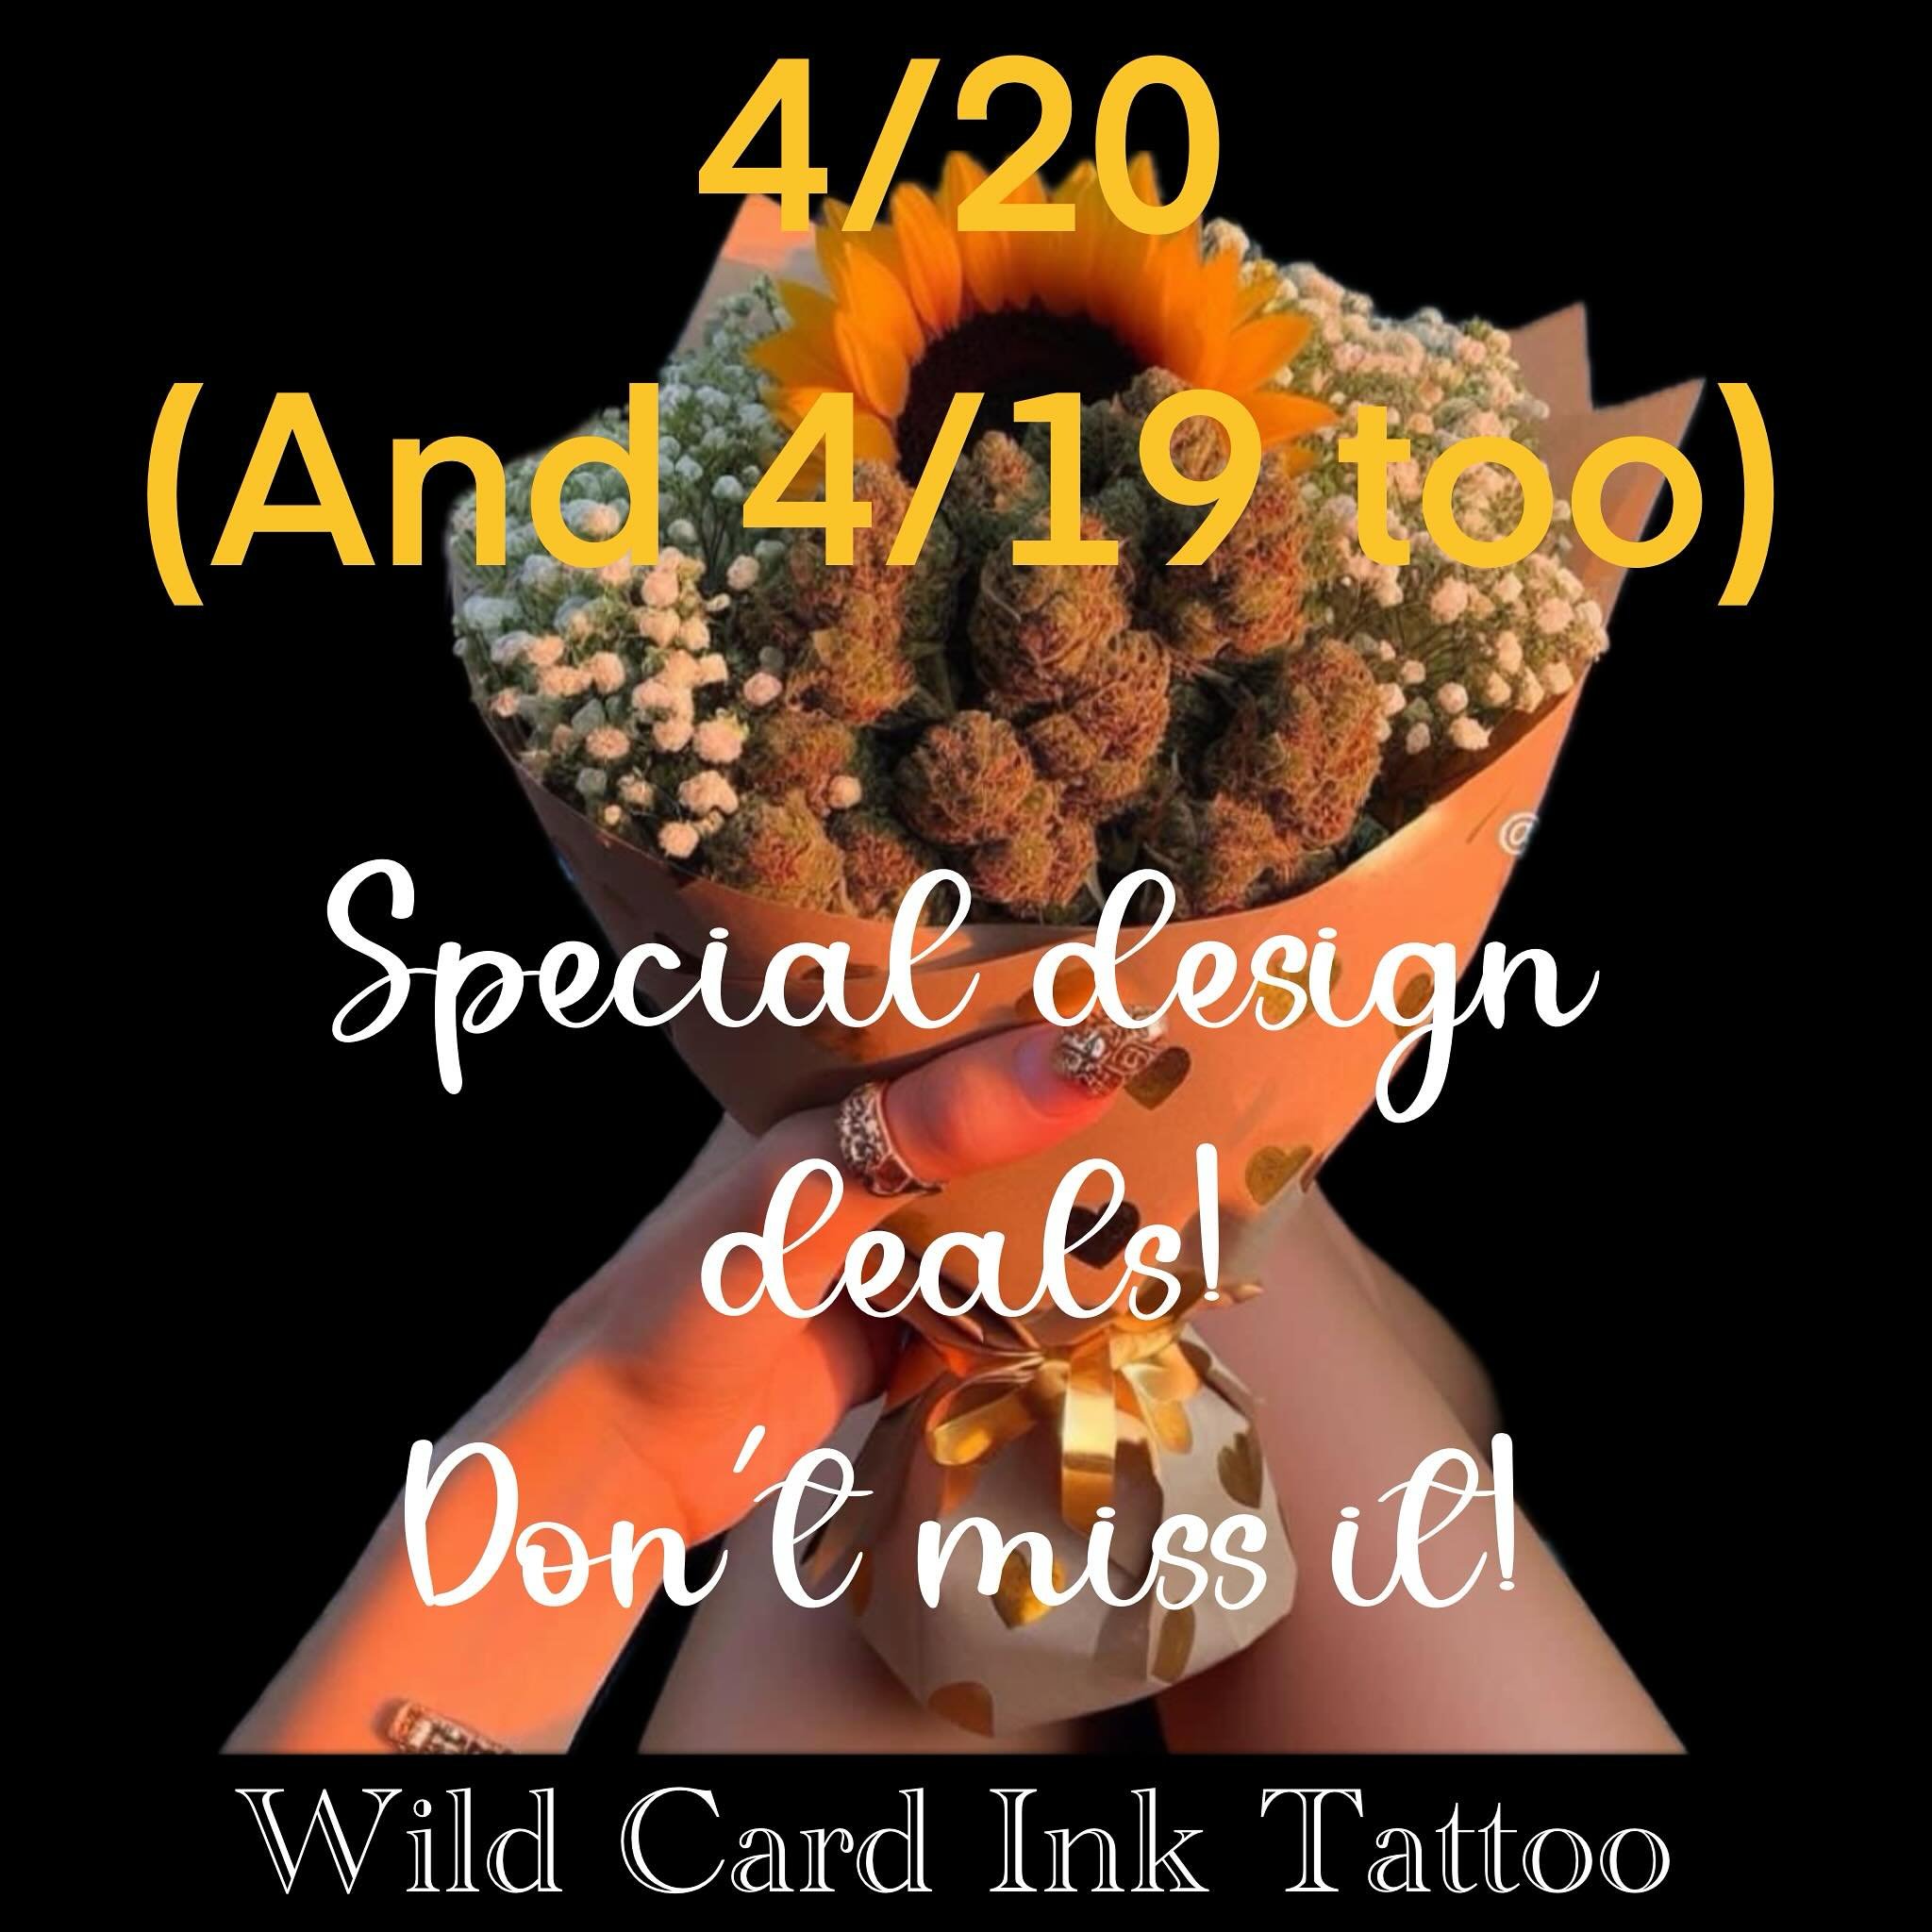 Upcoming special this month #tattoo #tattooartist #lasvegas #lasvegastattooartist #criticaltattoosupply #dynamiccolor #girlswithtattoos #tattooart #tattoos #tattoolife #tattooedgirls #guyswithtattoos #inked #tattooed #bodyart #art #eternalink #tattoo